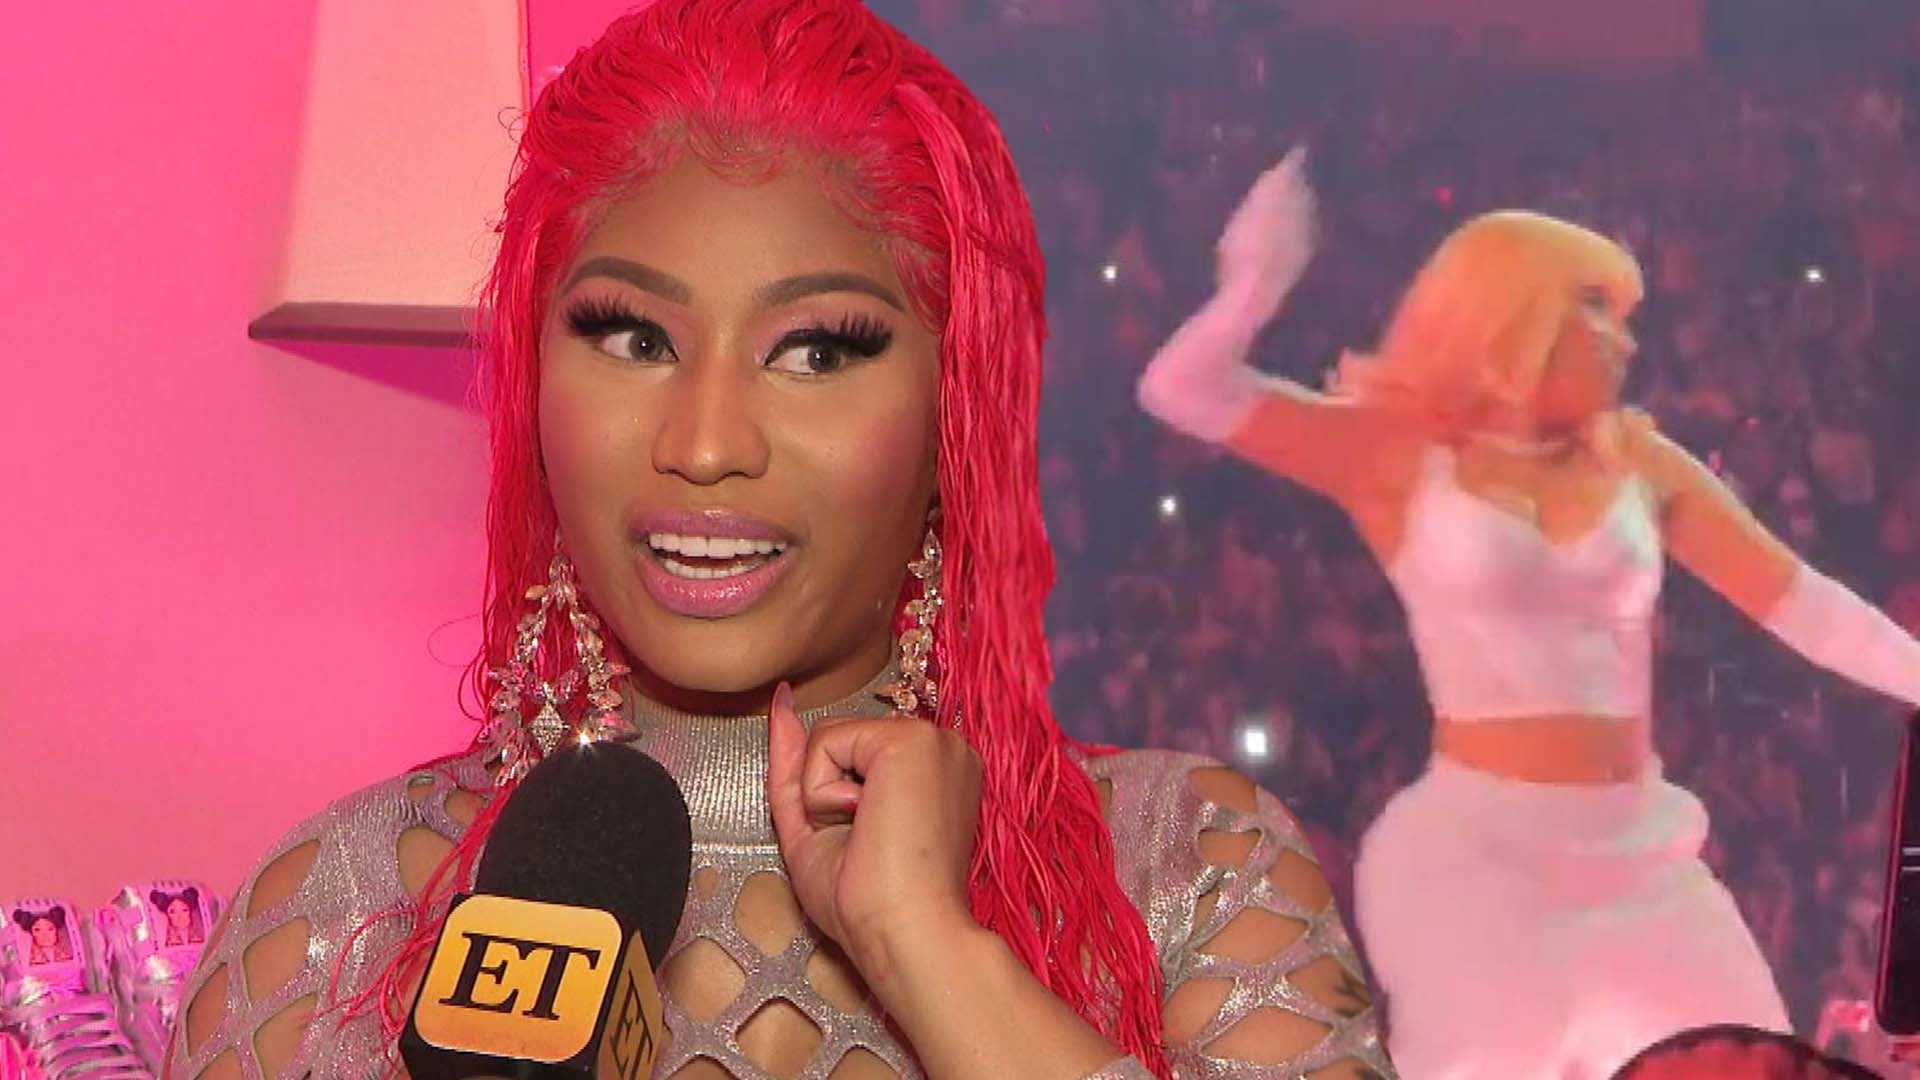 Watch Nicki Minaj Throw Object Back at Fans Who Threw It at Her During Concert